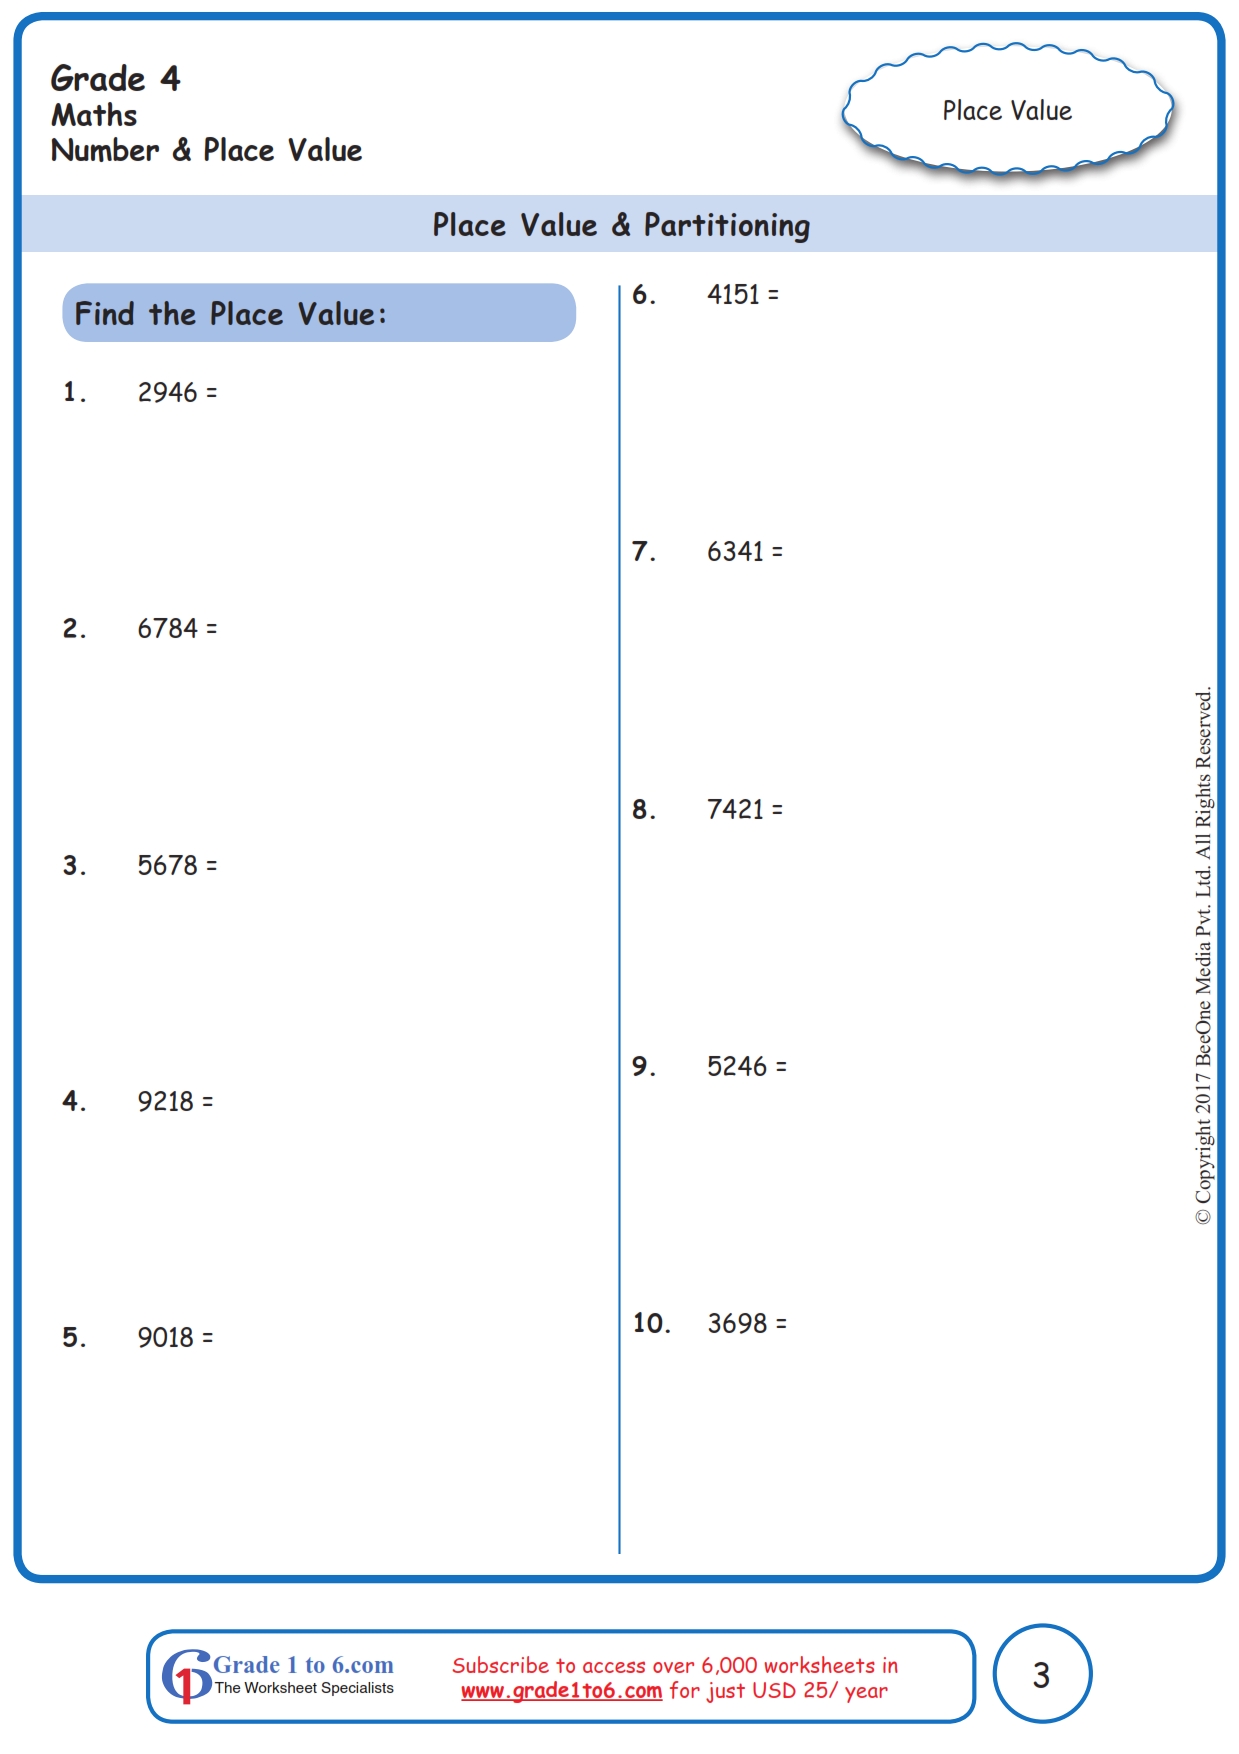 Grade 4 Place Value Worksheets www grade1to6